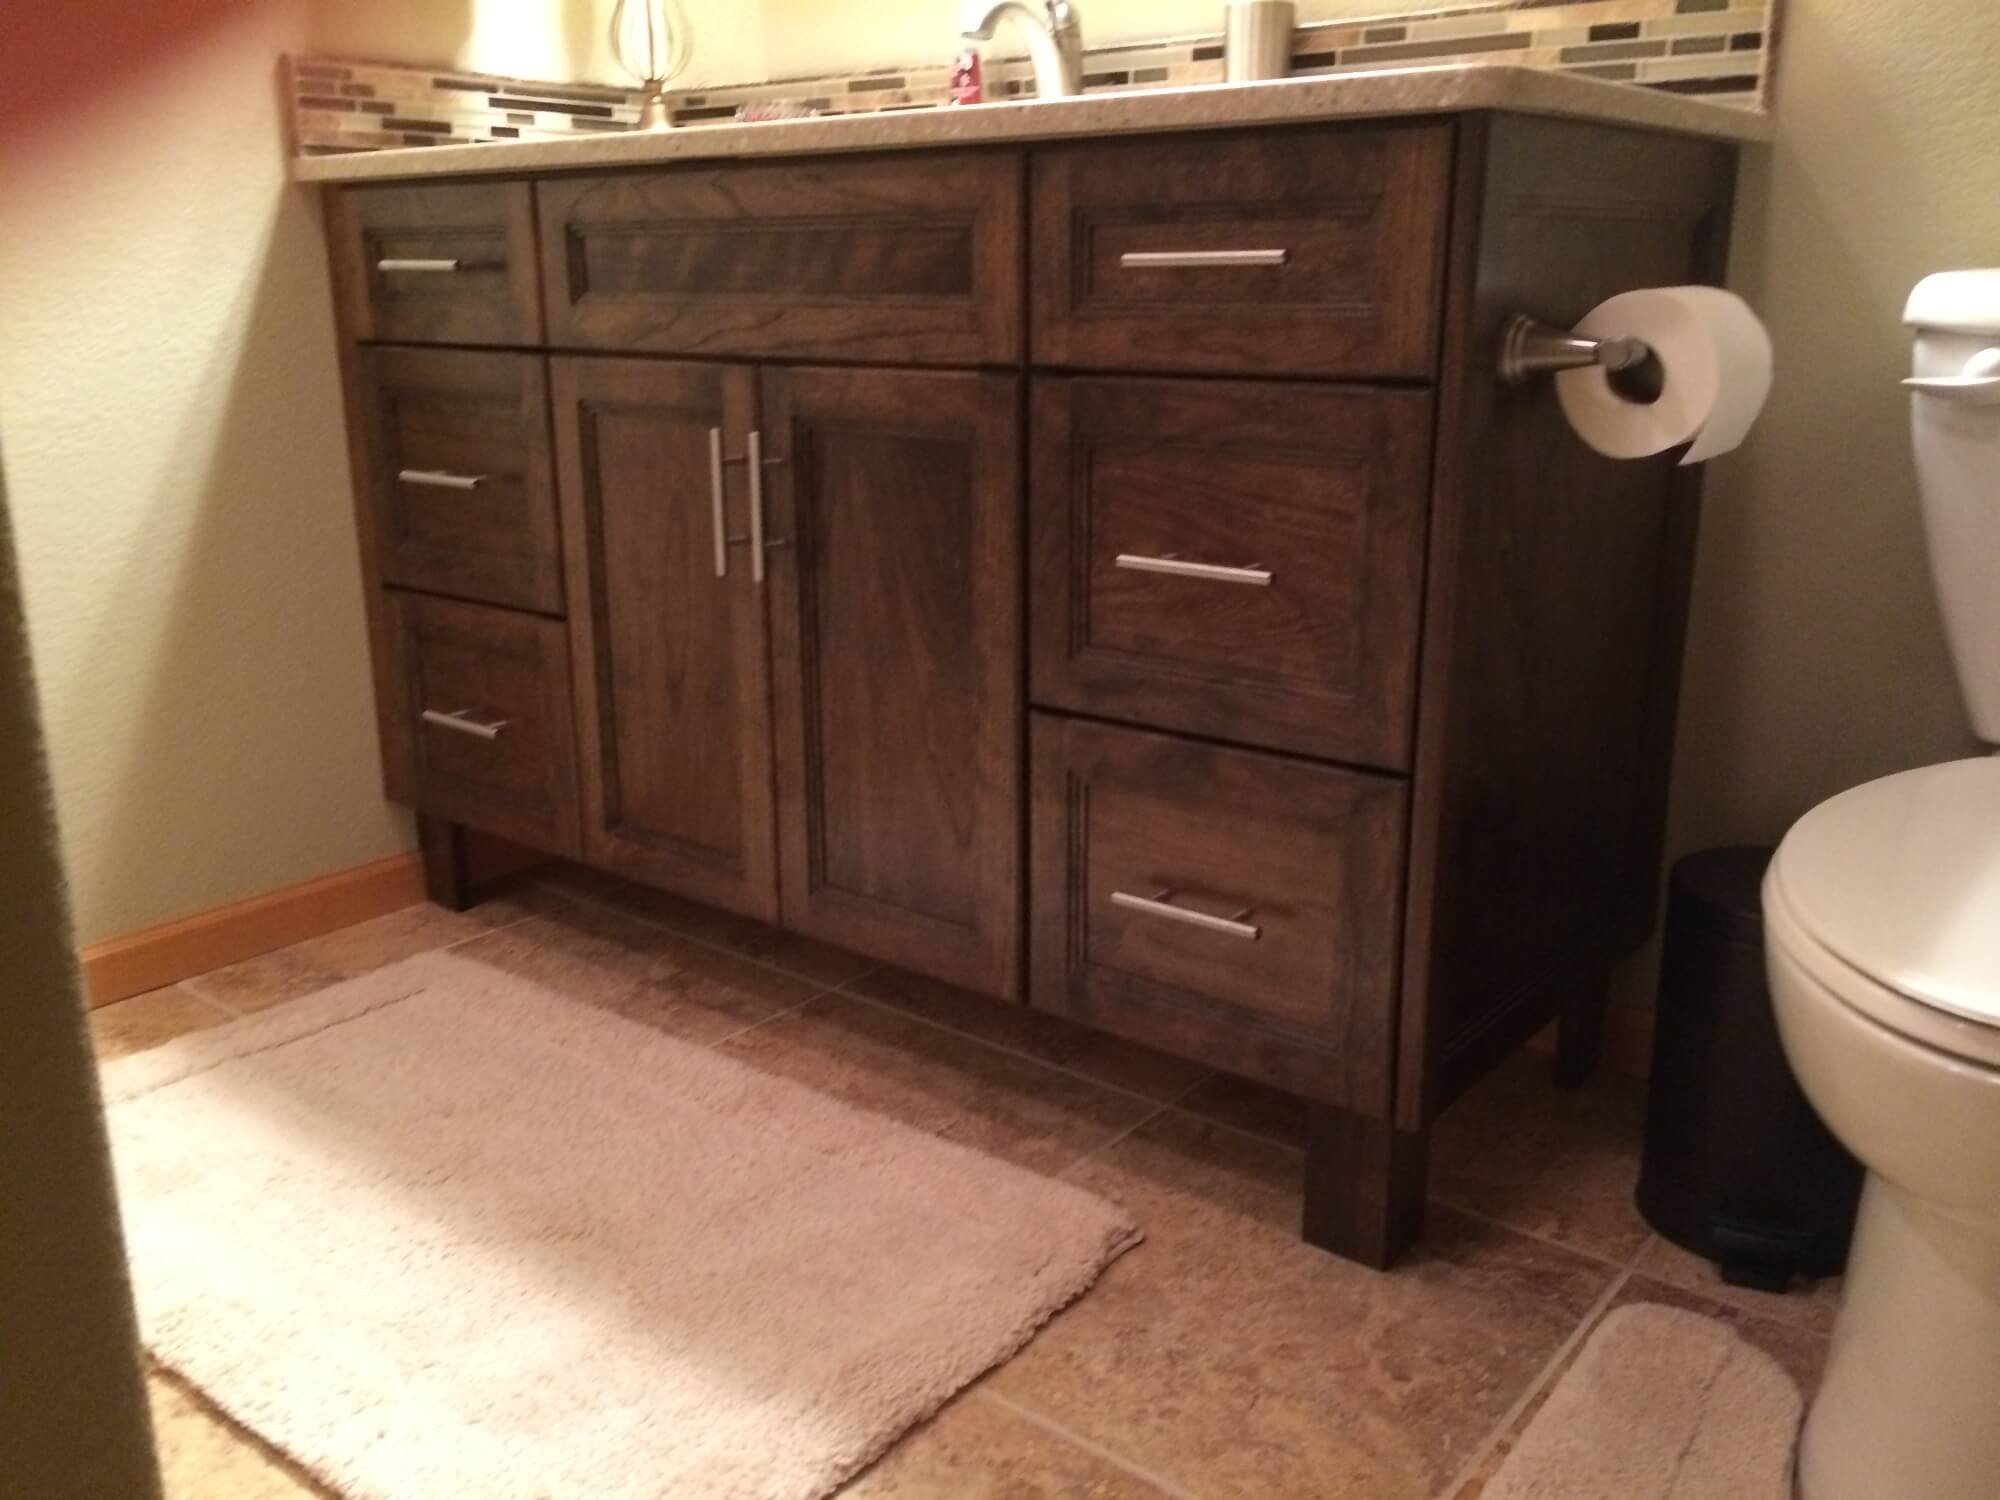 bathroom sink cabinets with drawers on left